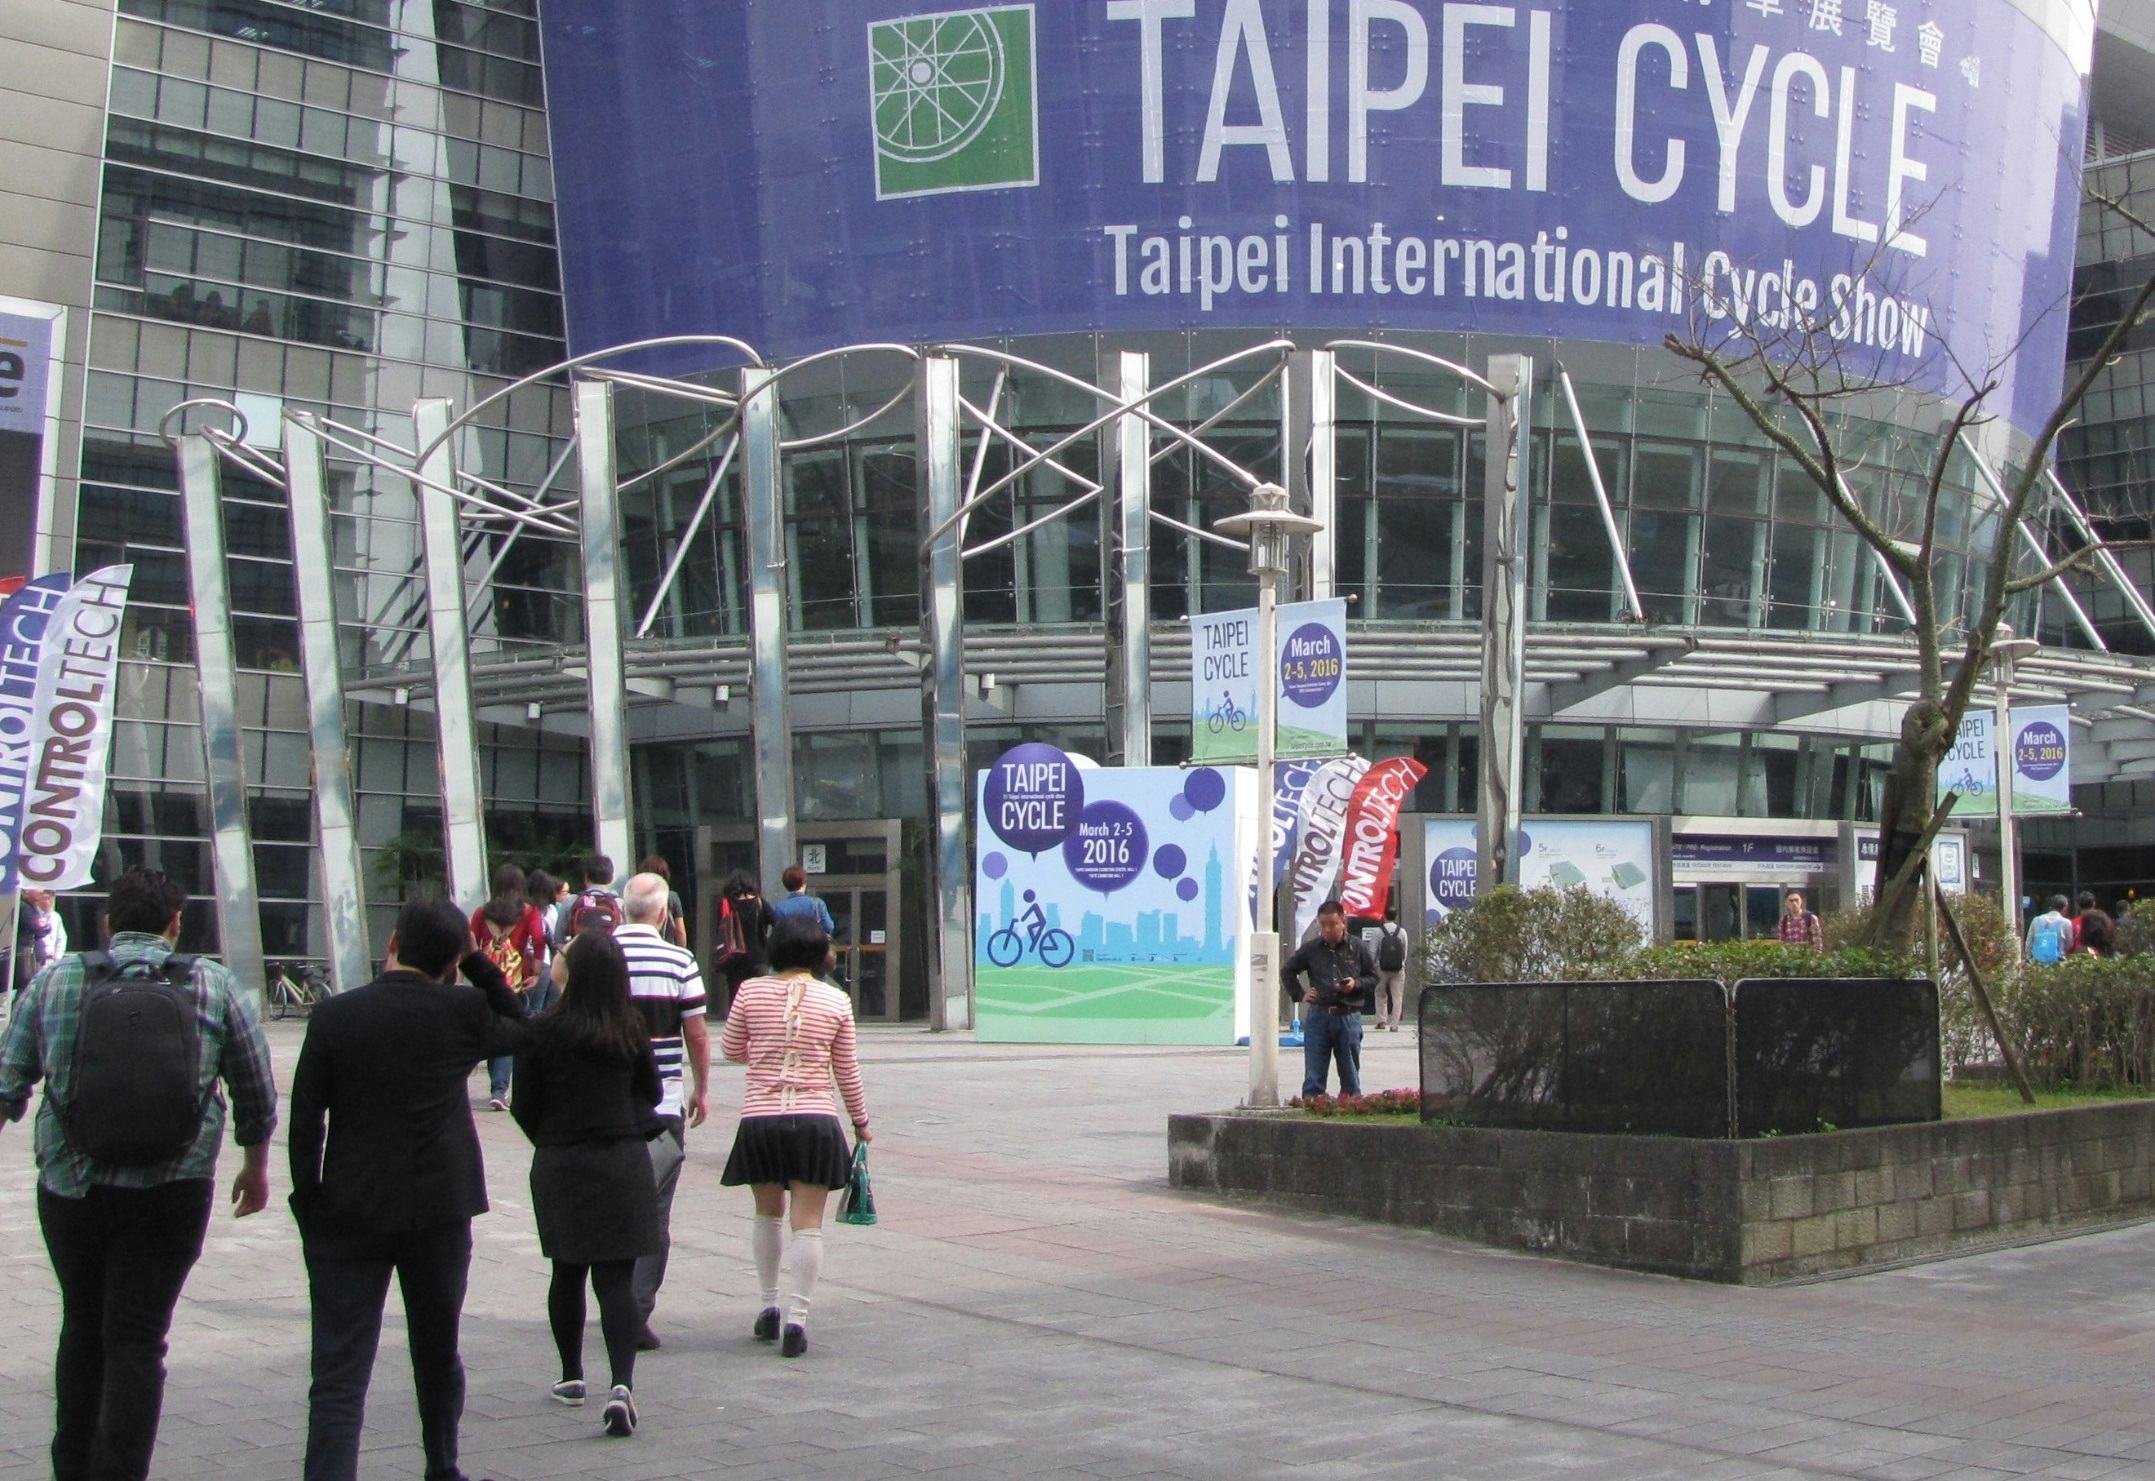 Taipei Cycle Show organizer TAITRA surveys Taiwan based exhibitors for collecting opinions on postponement or cancellation on next month’s event. – Photo Bike Europe